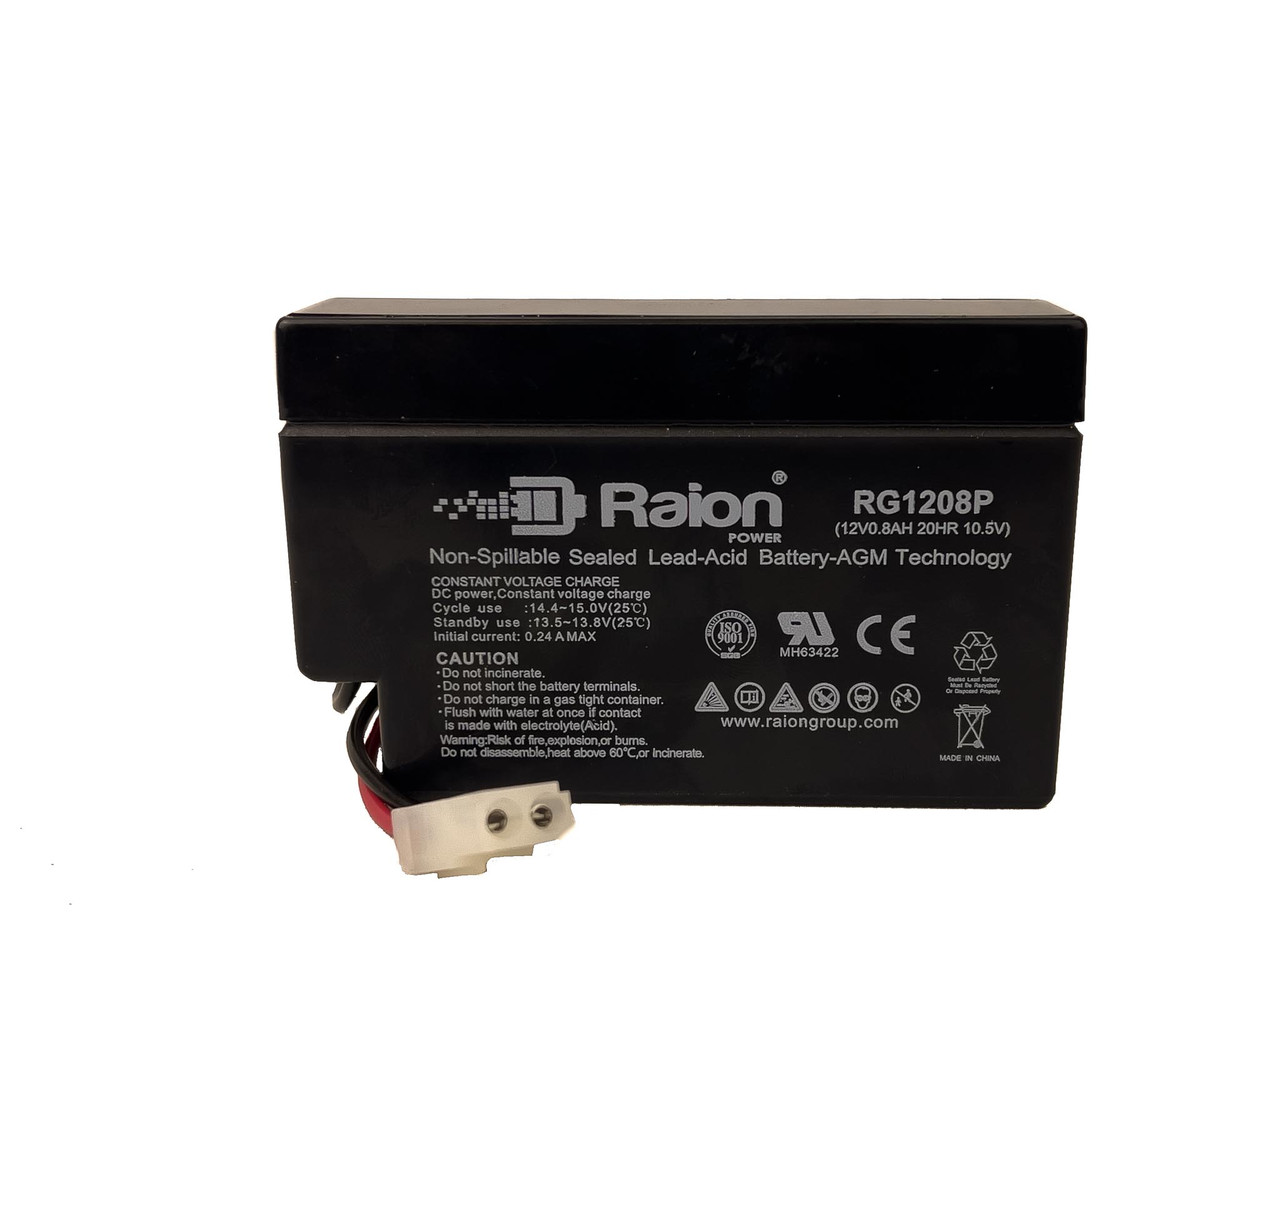 Raion Power 12V 0.8Ah SLA Battery With T1 Terminals For Gaston GT12-0.8